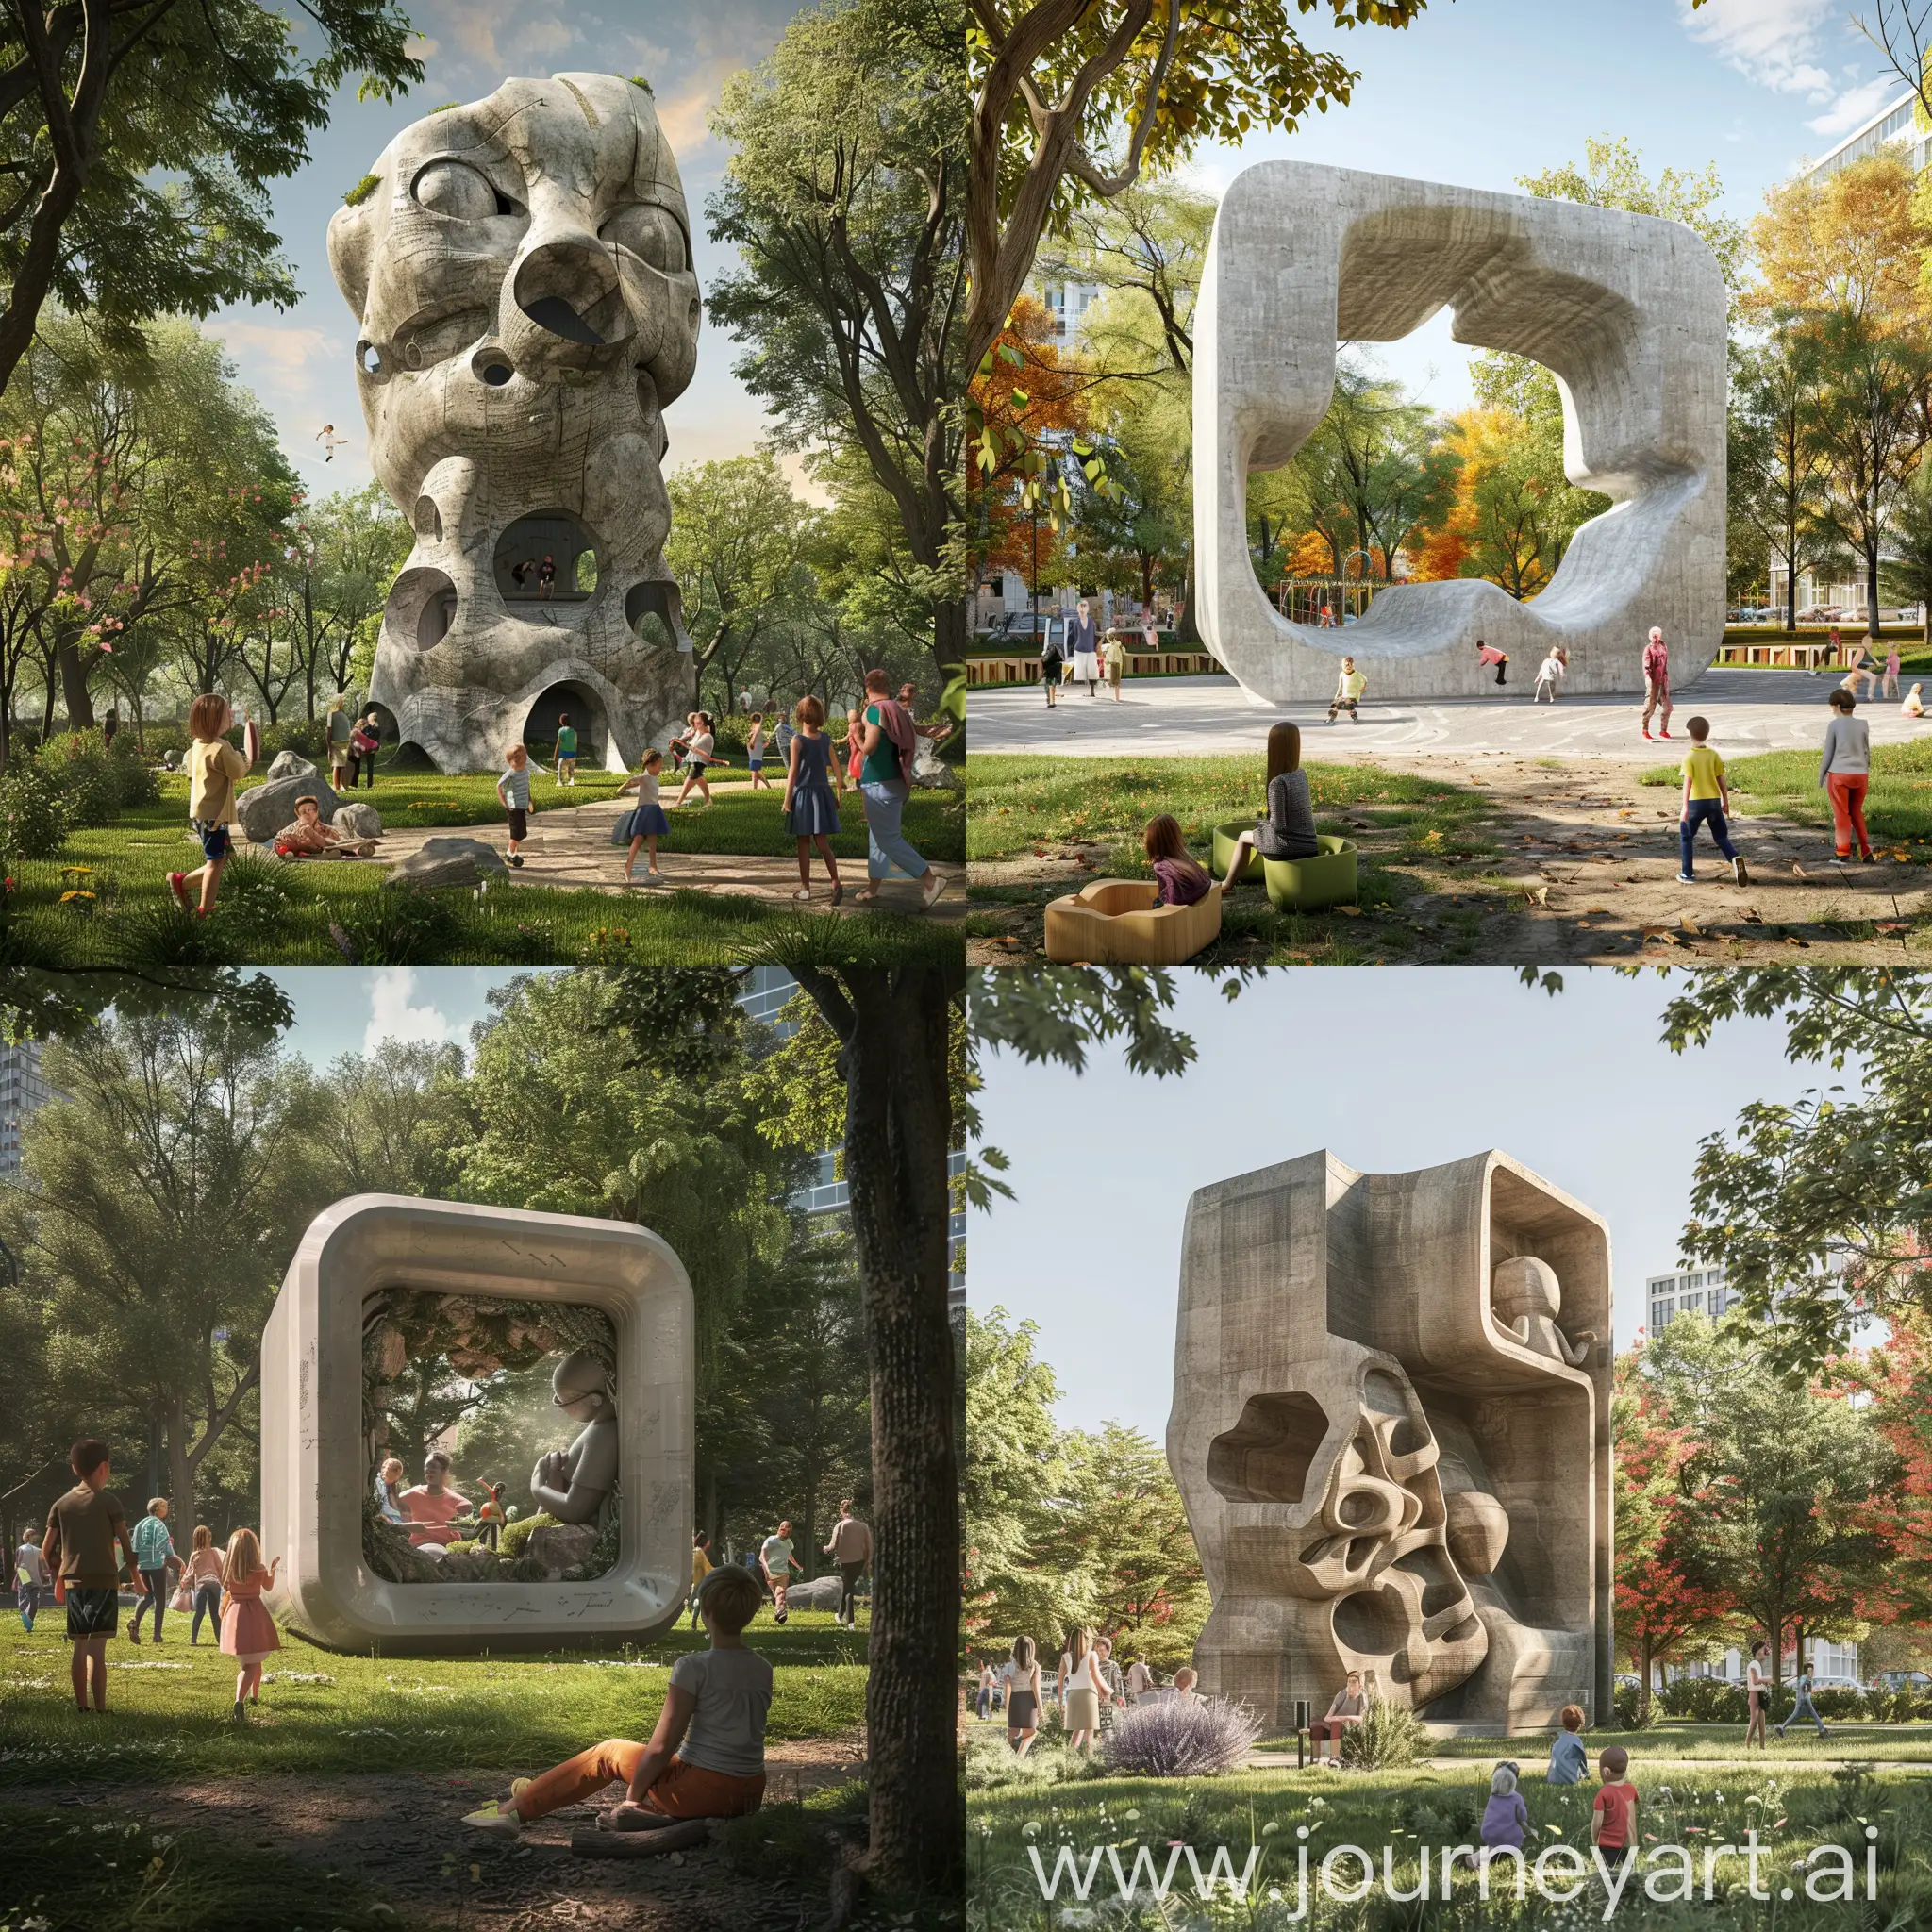 Urban-Sculpture-on-Education-Children-Playing-with-Parents-in-Park